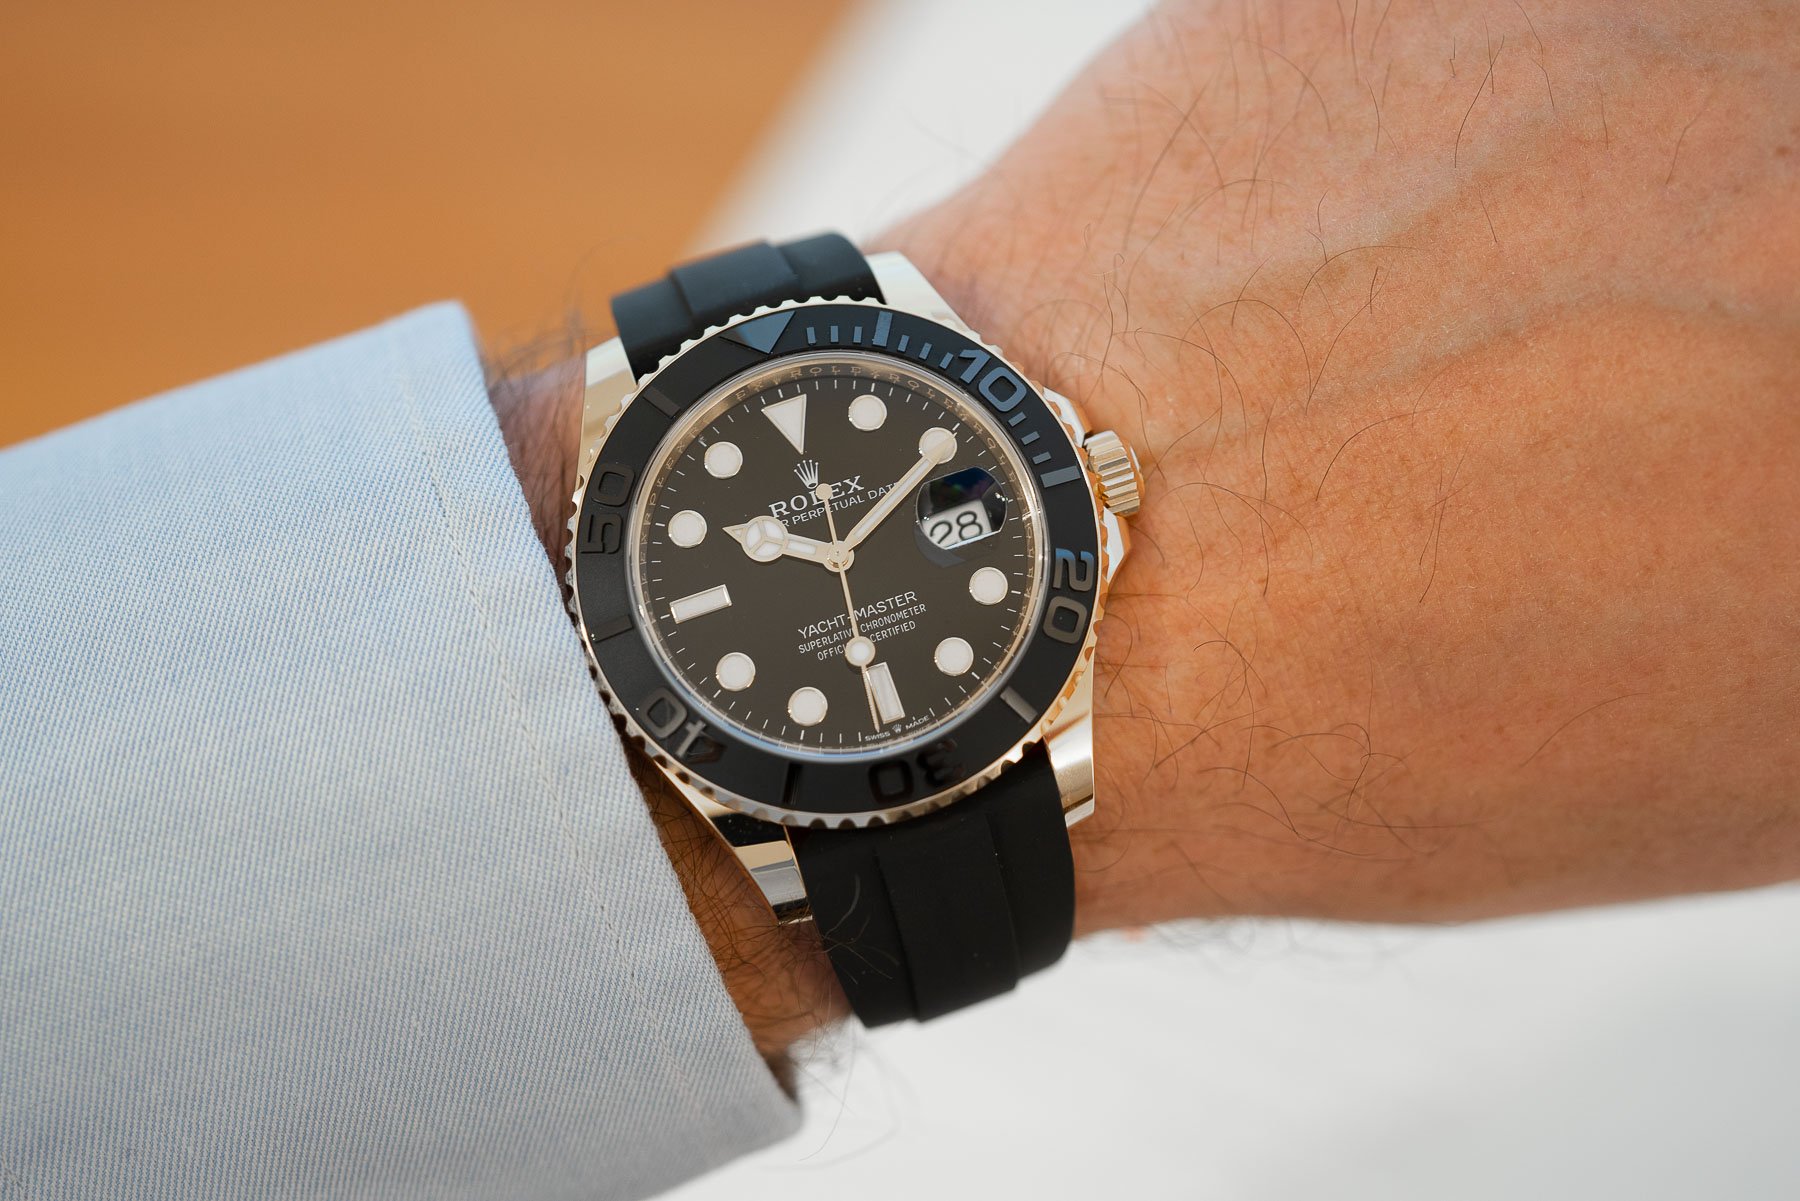 A Bigger Boat: Introducing the Rolex Oyster Perpetual Yacht-Master